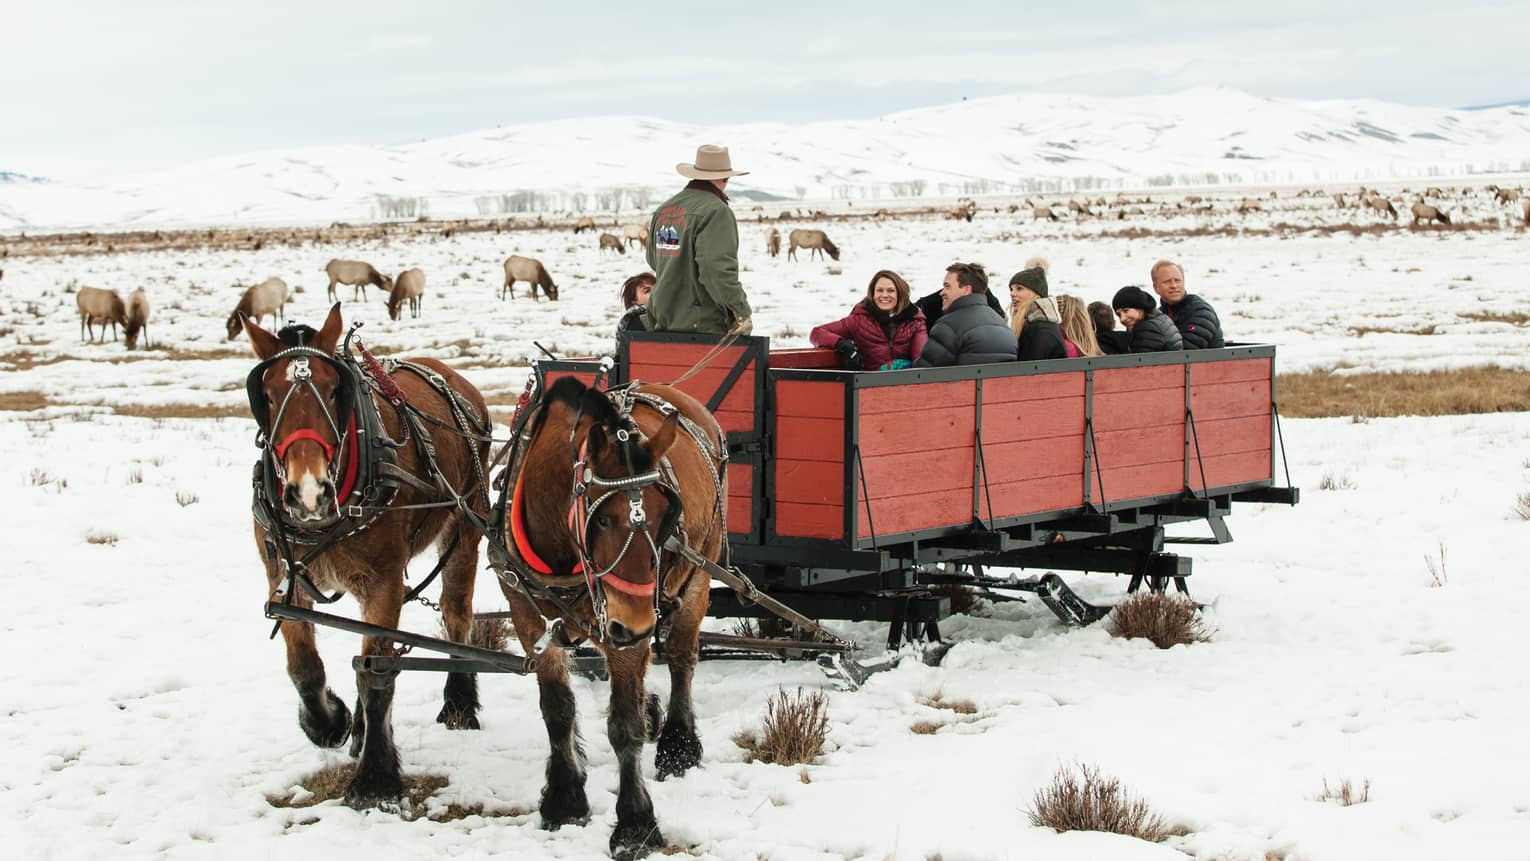 Group of friends in large red sleigh pulled by two horses, elk grazing on snow in background